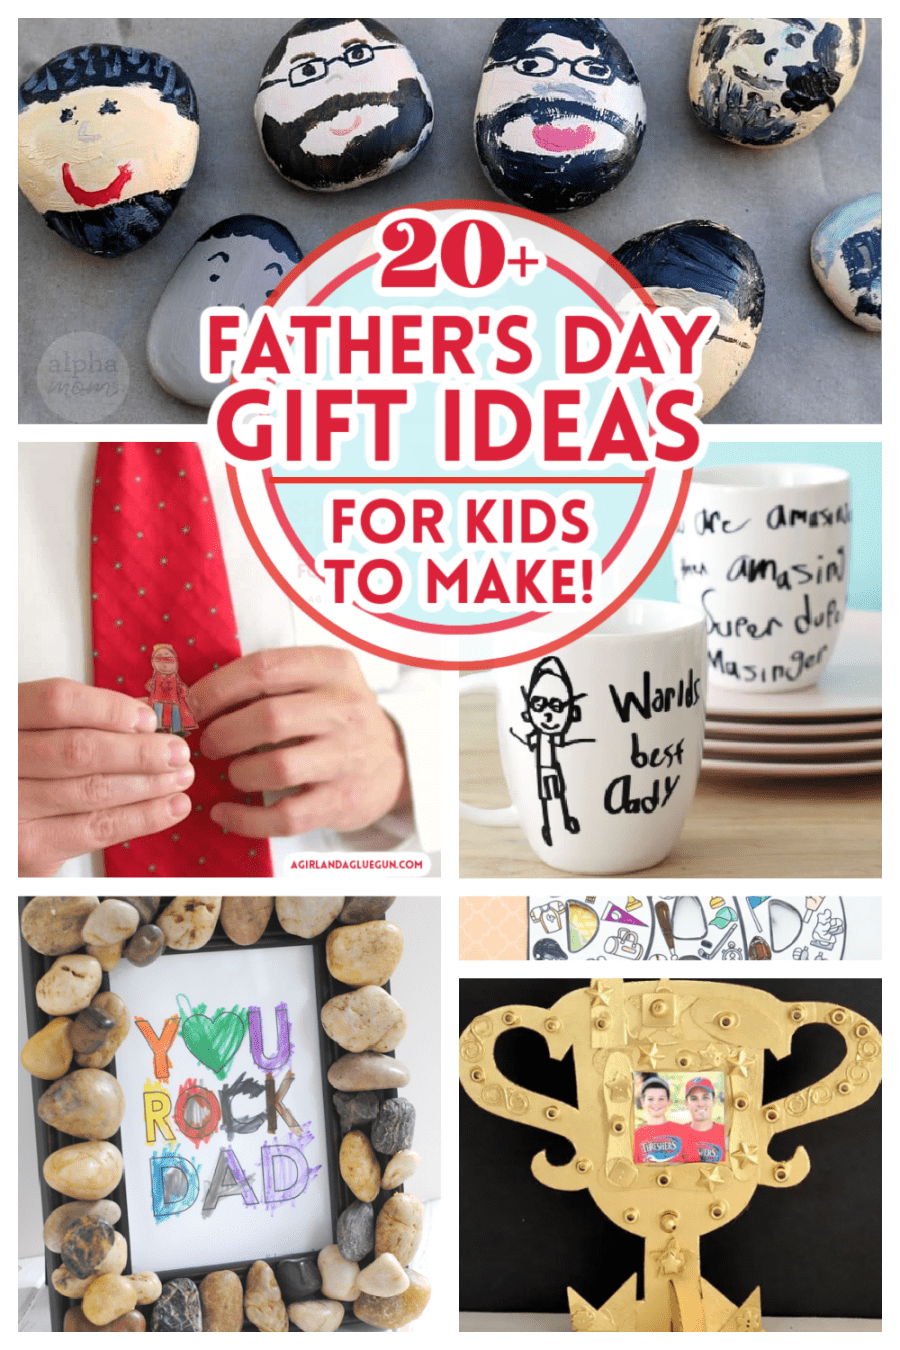 https://www.agirlandagluegun.com/wp-content/uploads/2013/06/20-fathers-day-gift-ideas-for-kids-to-make-1-900x1350.png